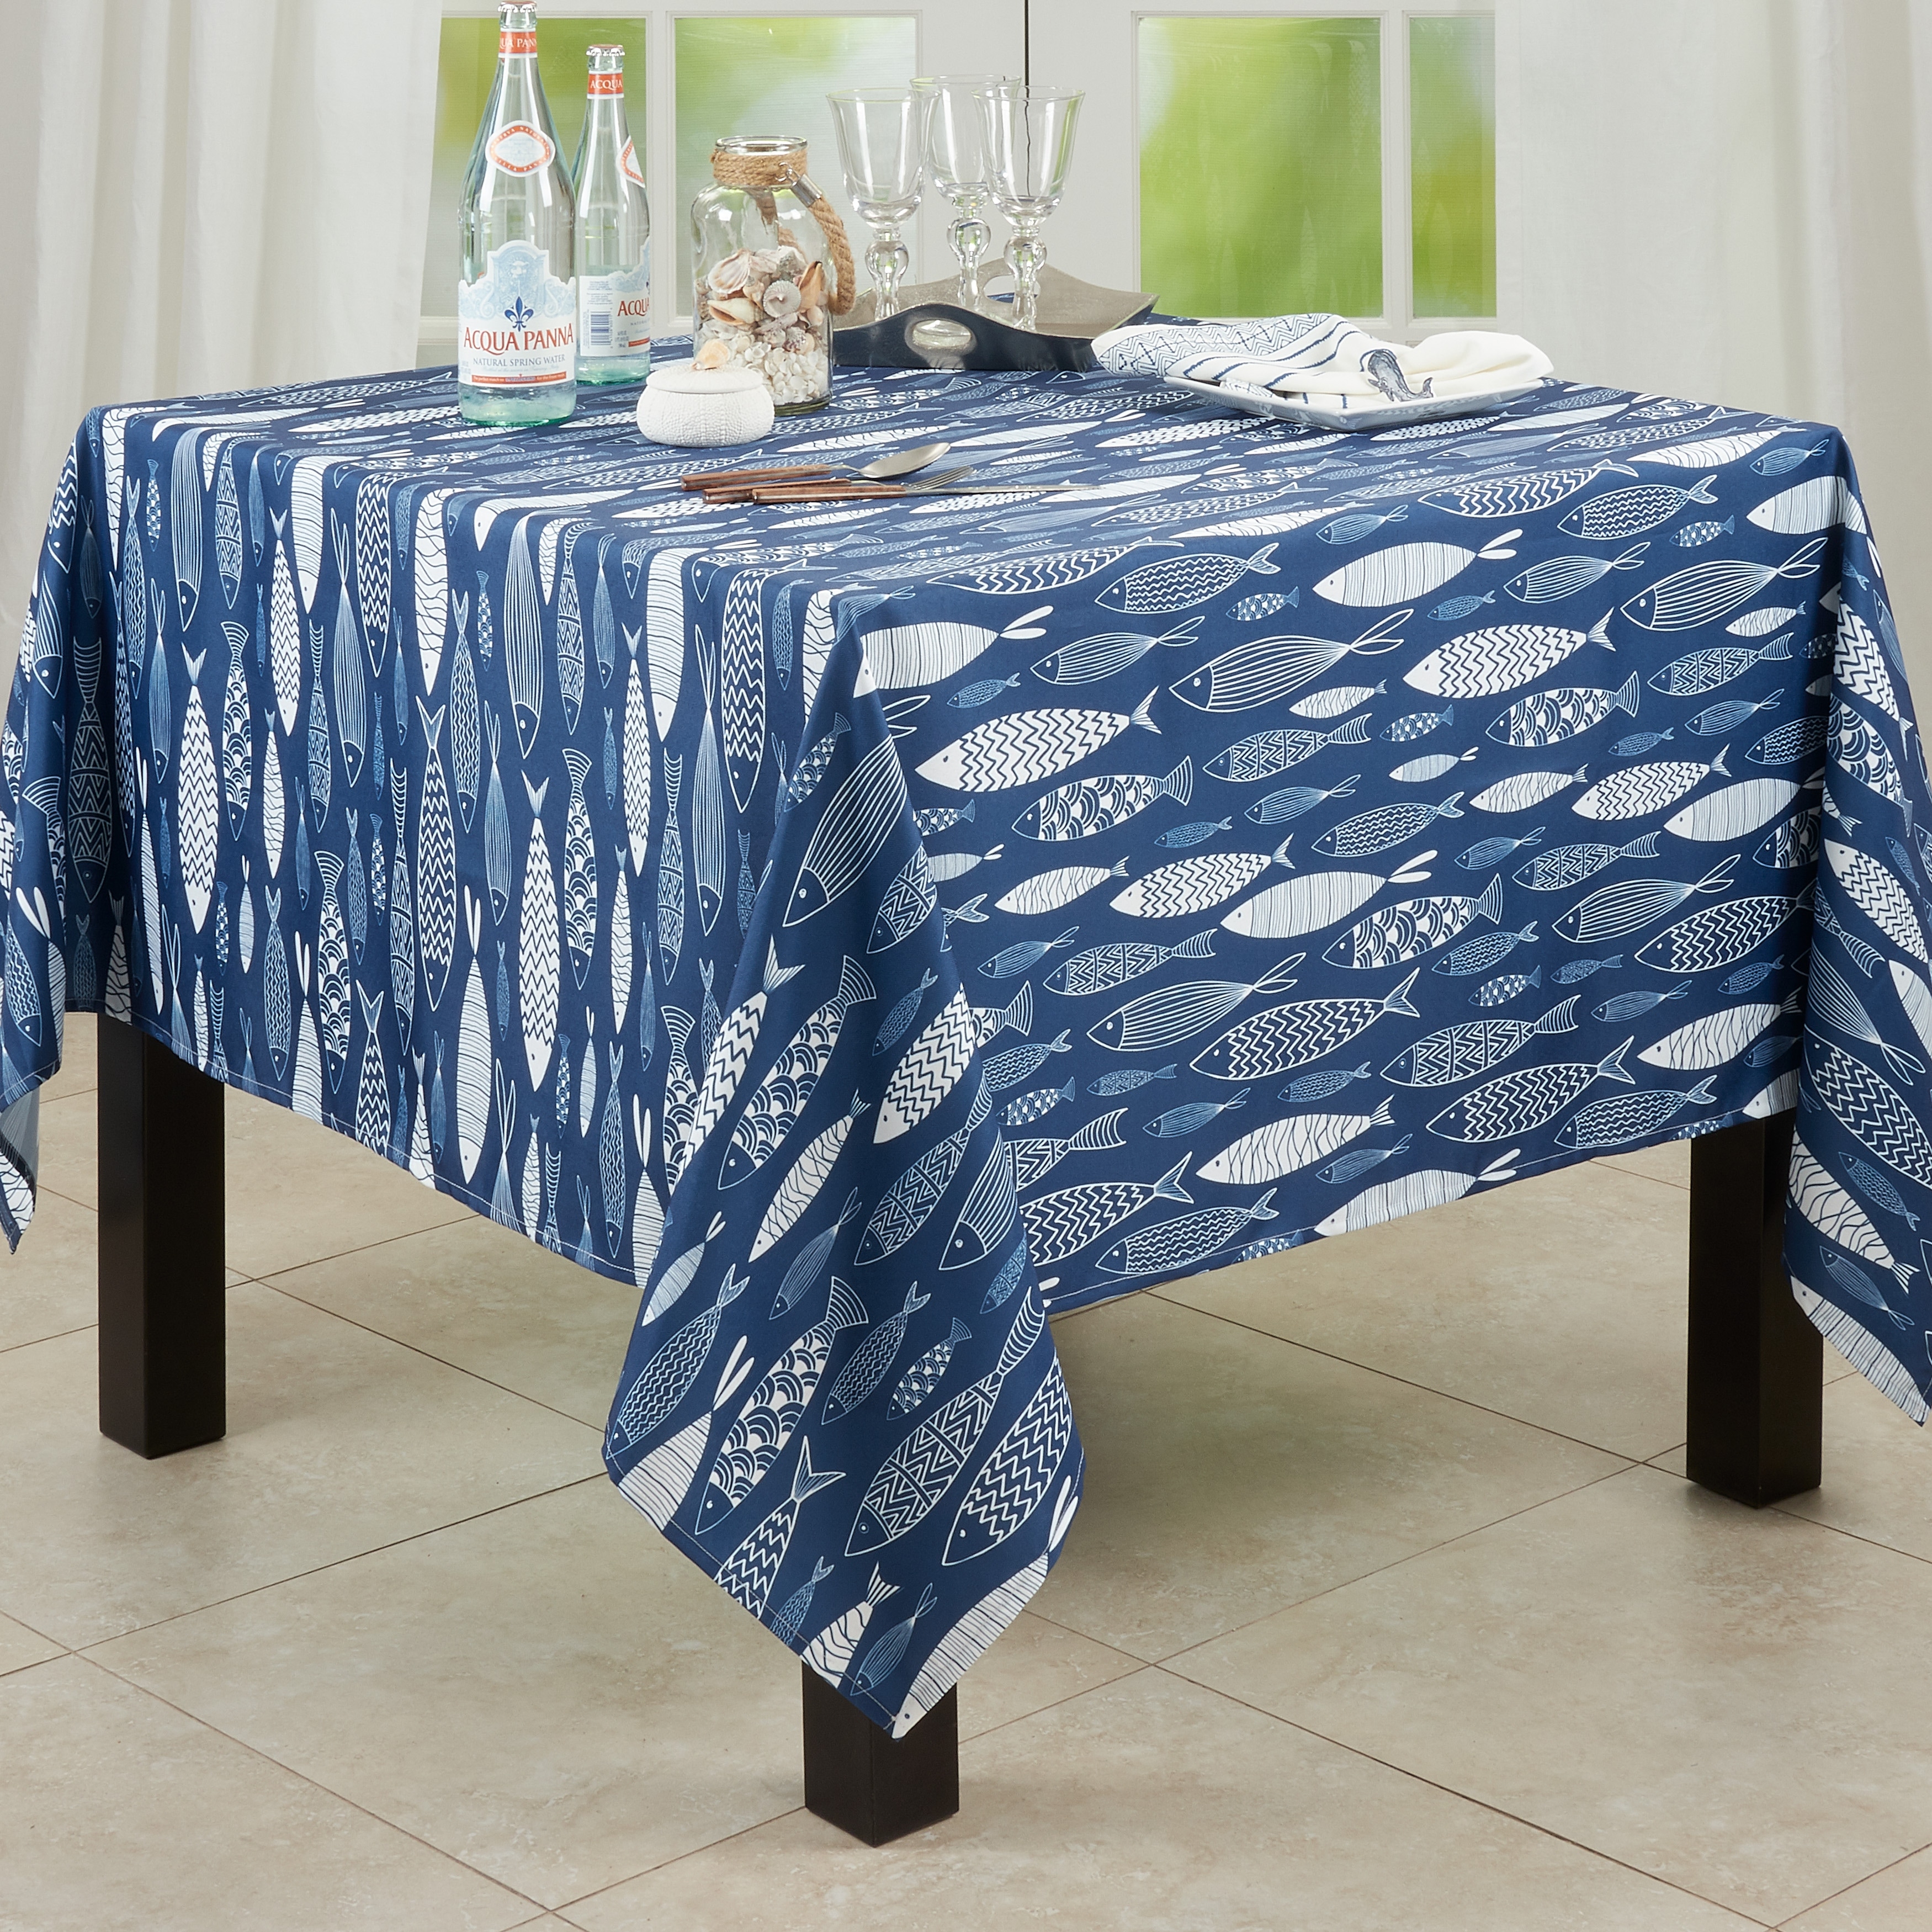 Tablecloth With Fish Design